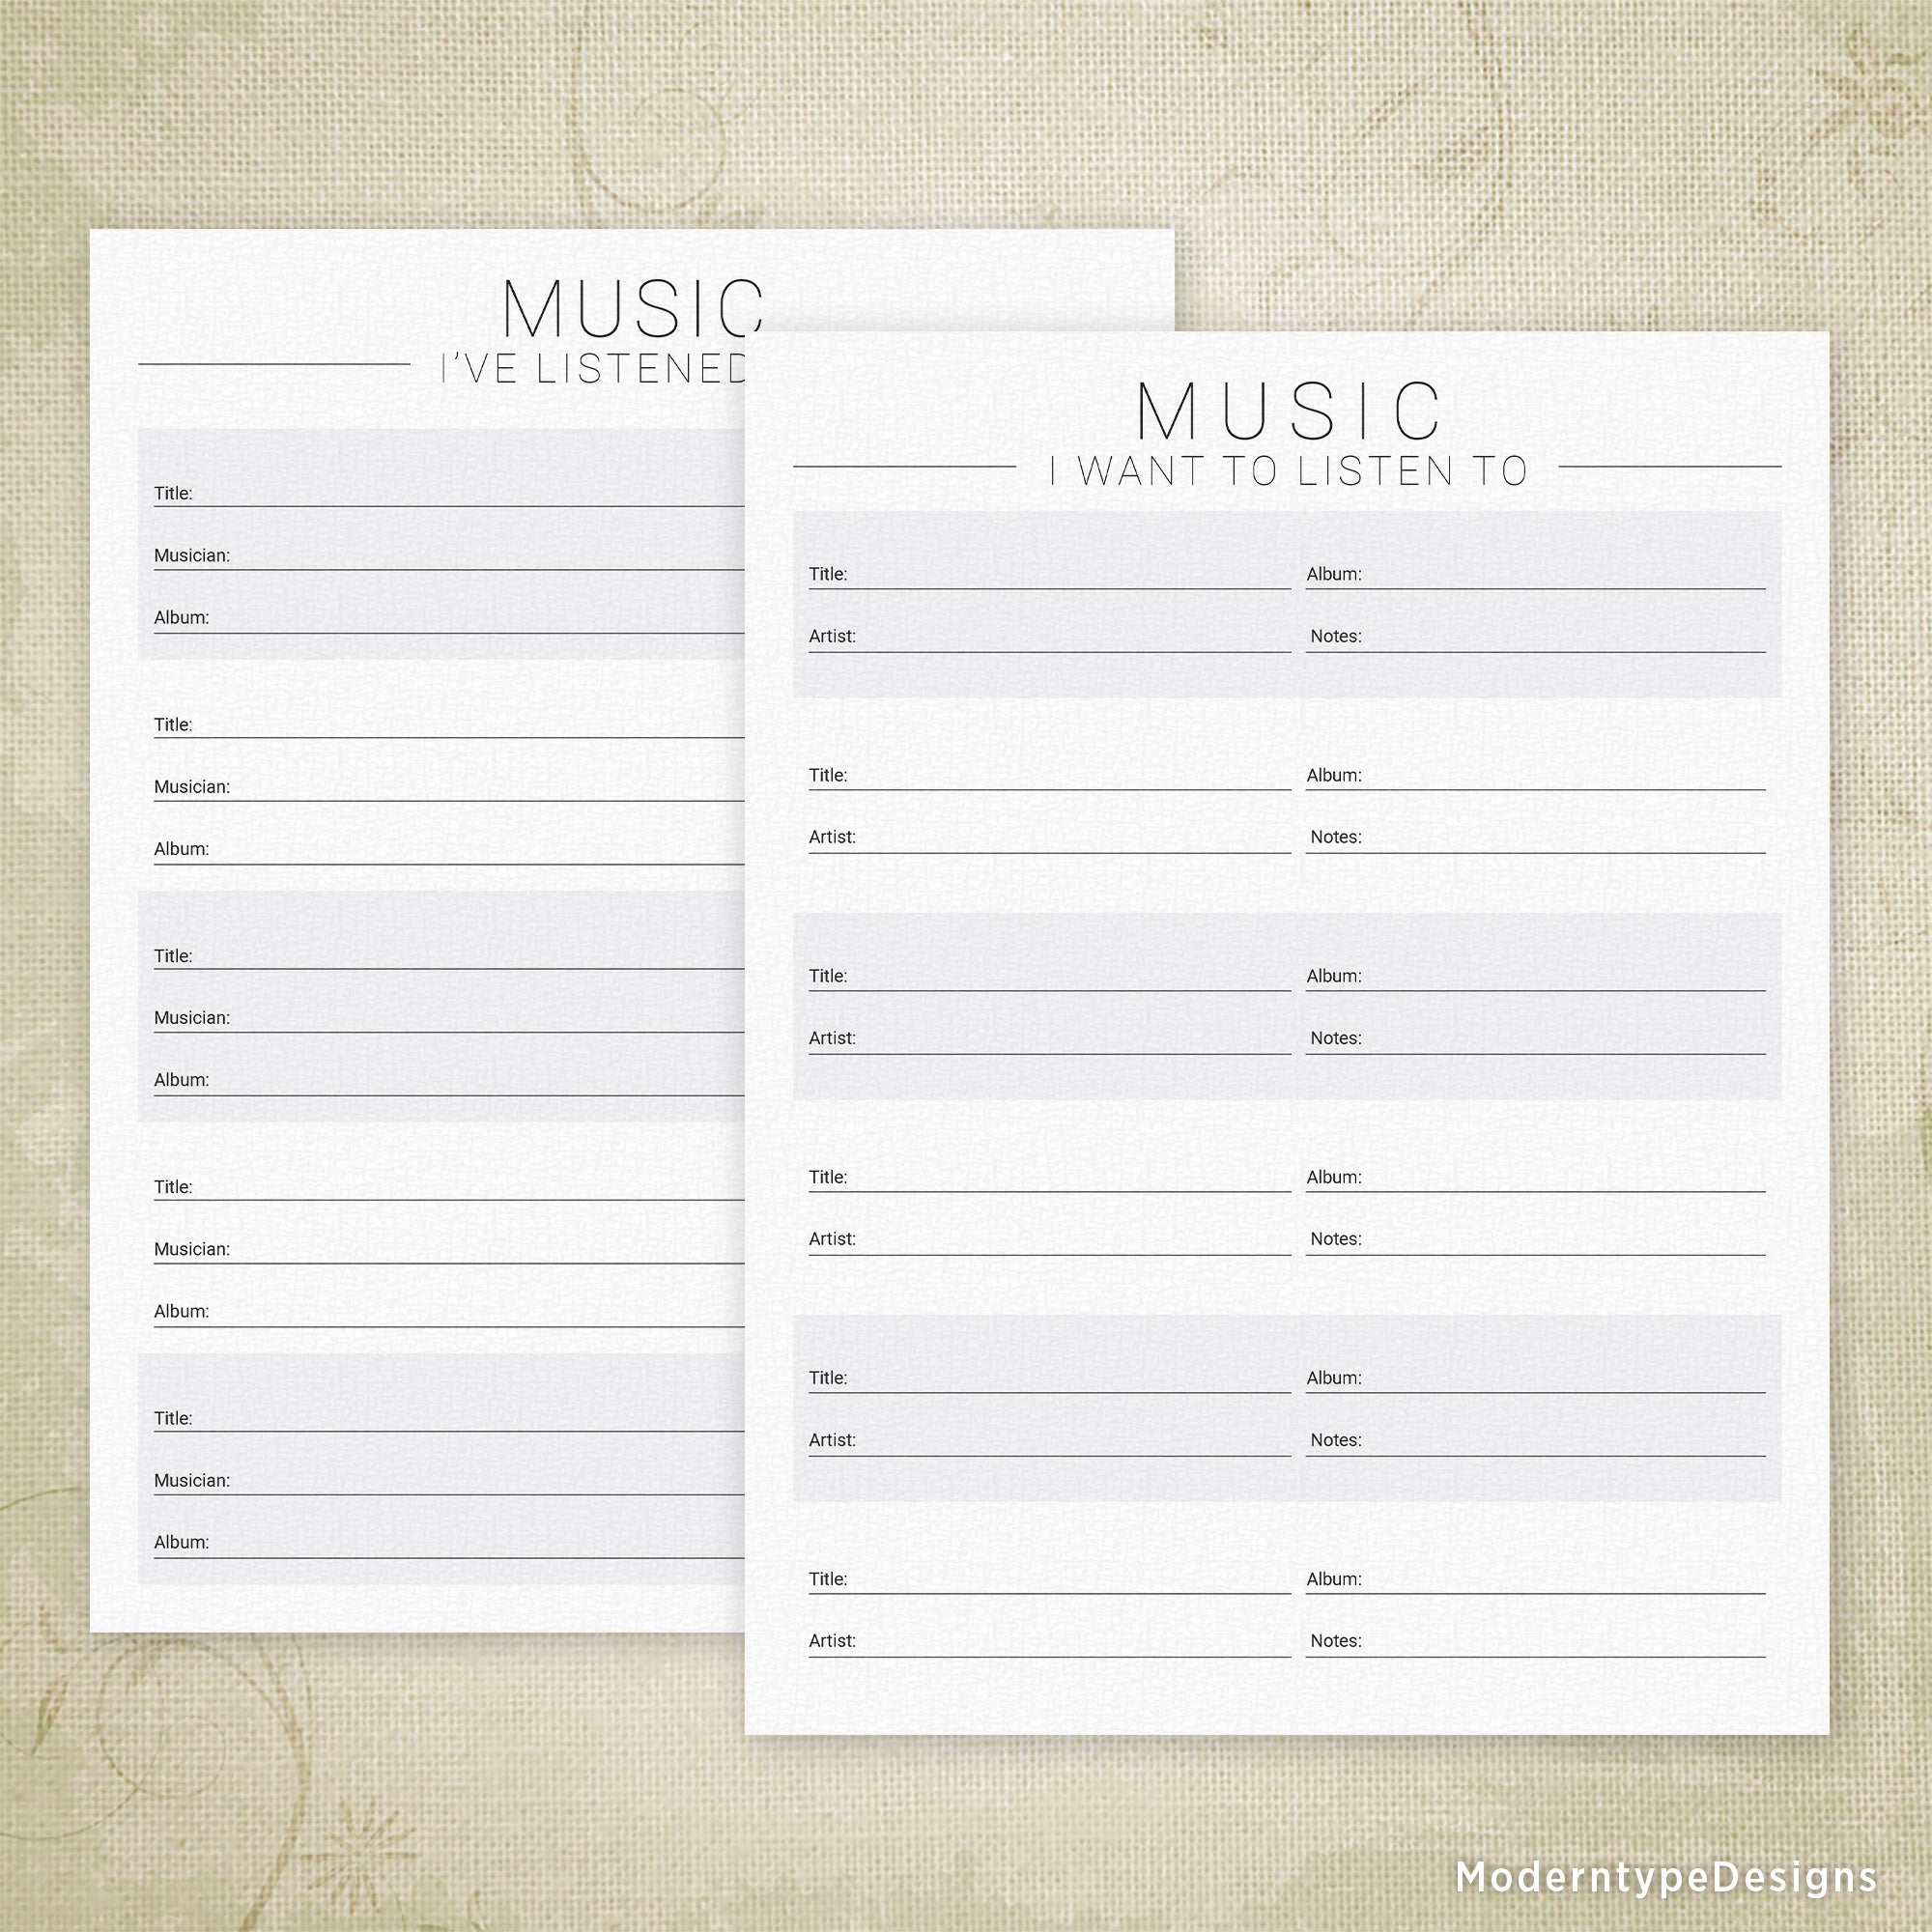 Music I Want to Listen To & I've Listened To Printable